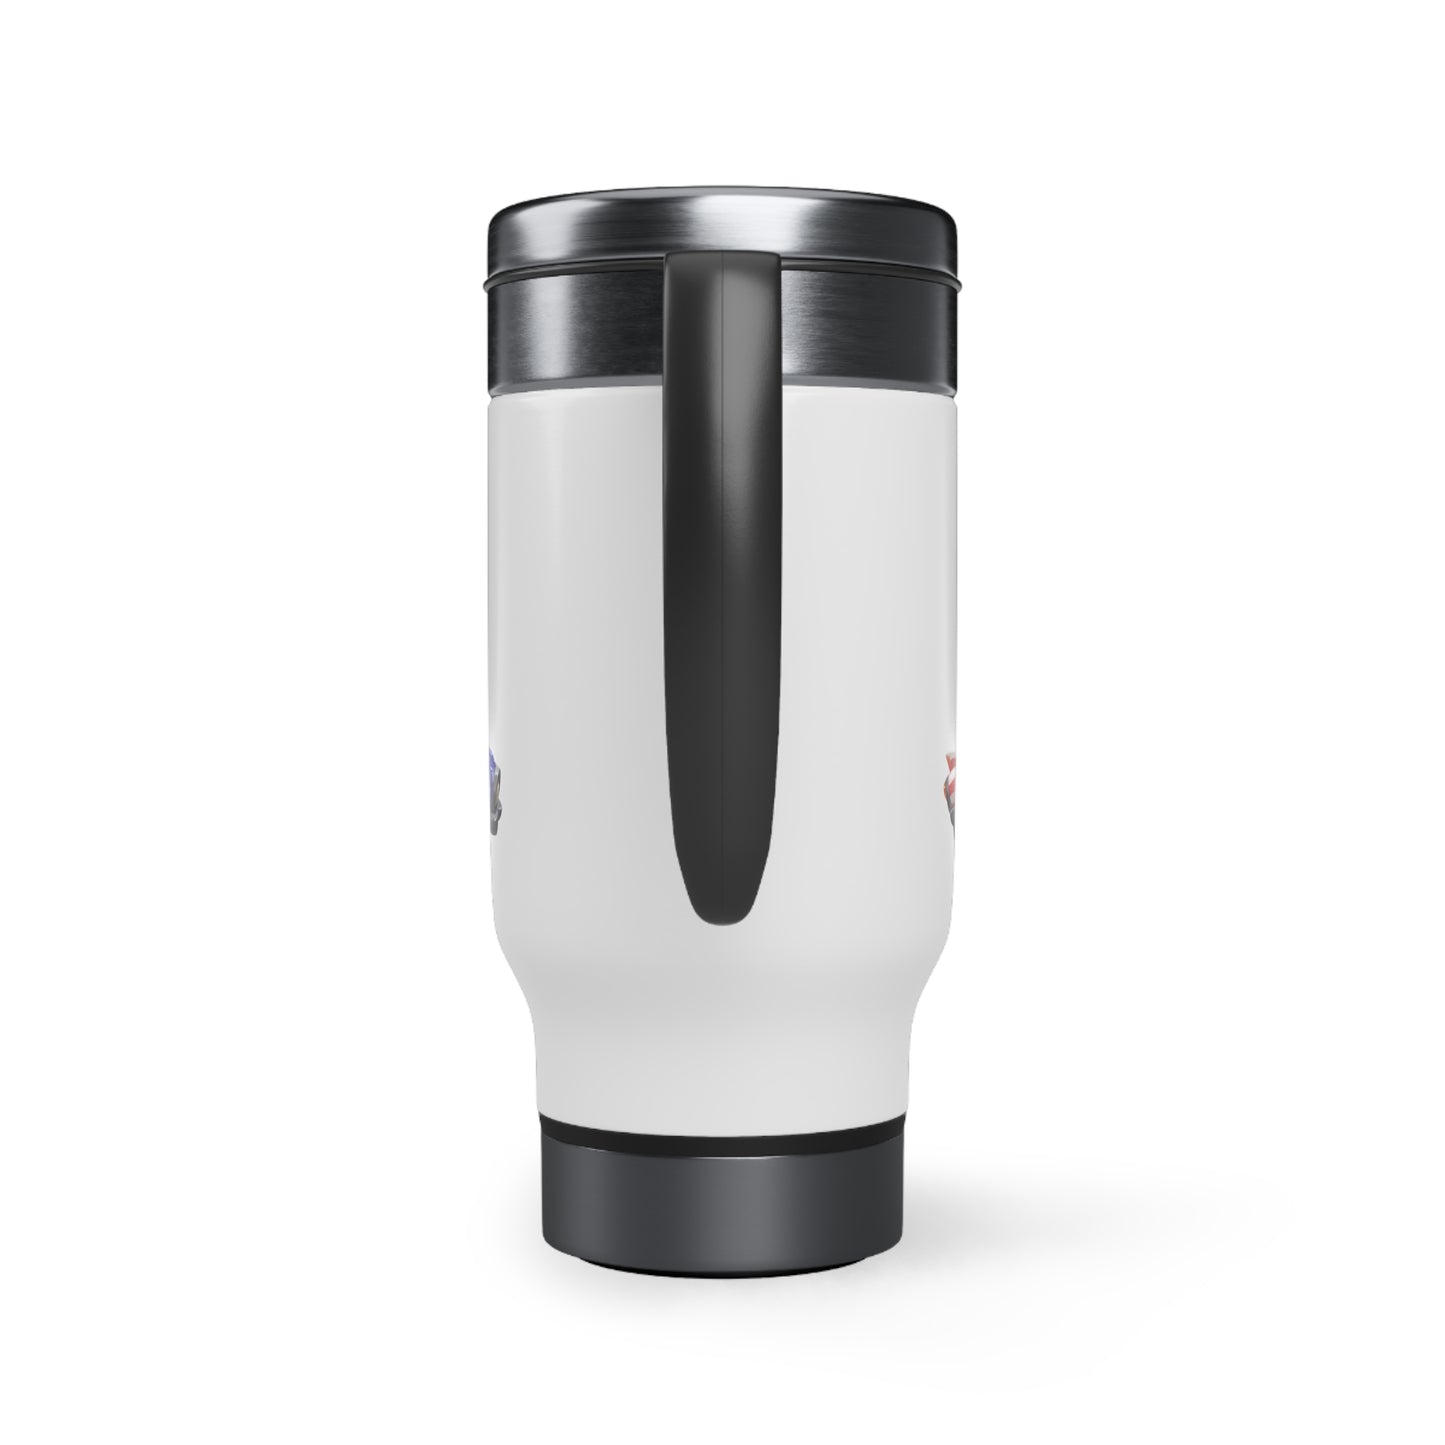 Drive American - Stainless Steel Travel Mug with Handle, 14oz